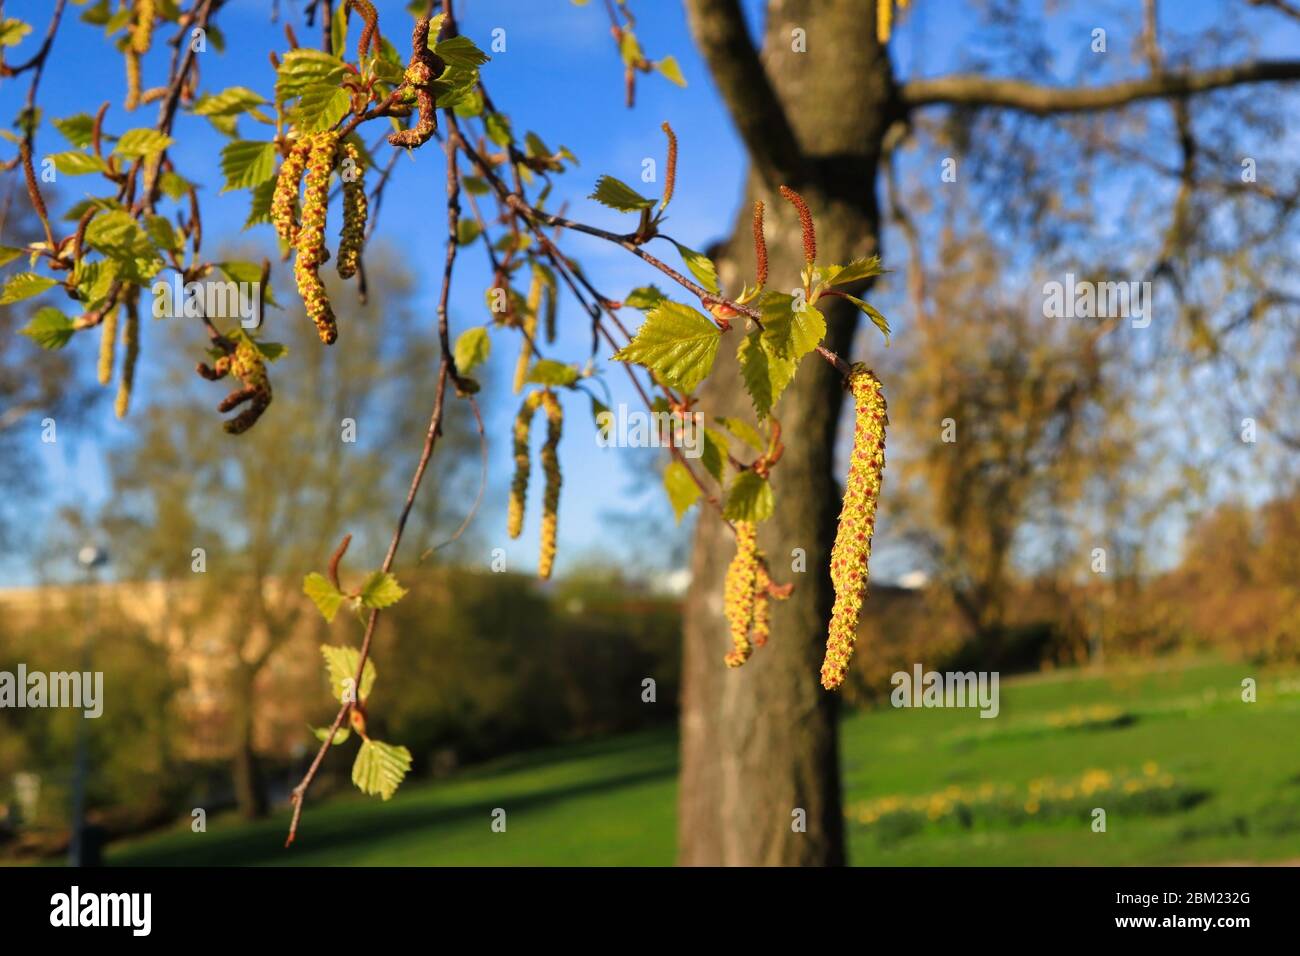 Birch tree (Betula) blossoms or catkins and green leaves in the spring against park scenery. Birch pollen allergy is a common seasonal allergy. Stock Photo